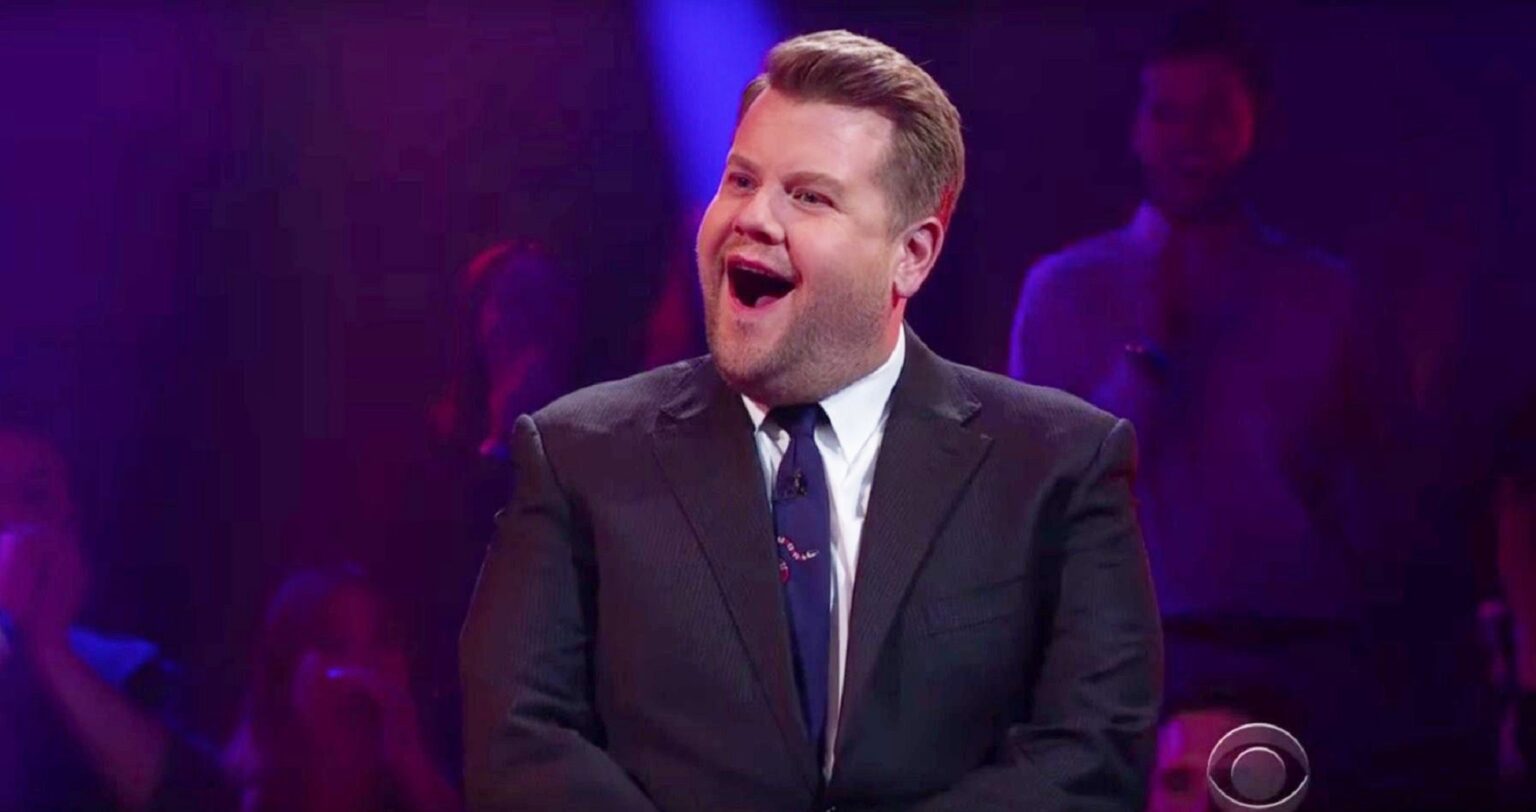 This is a look back on what James Corden used to do, and what we fear he’ll return to once he gets back to his studio for 'The Late Late Show'.